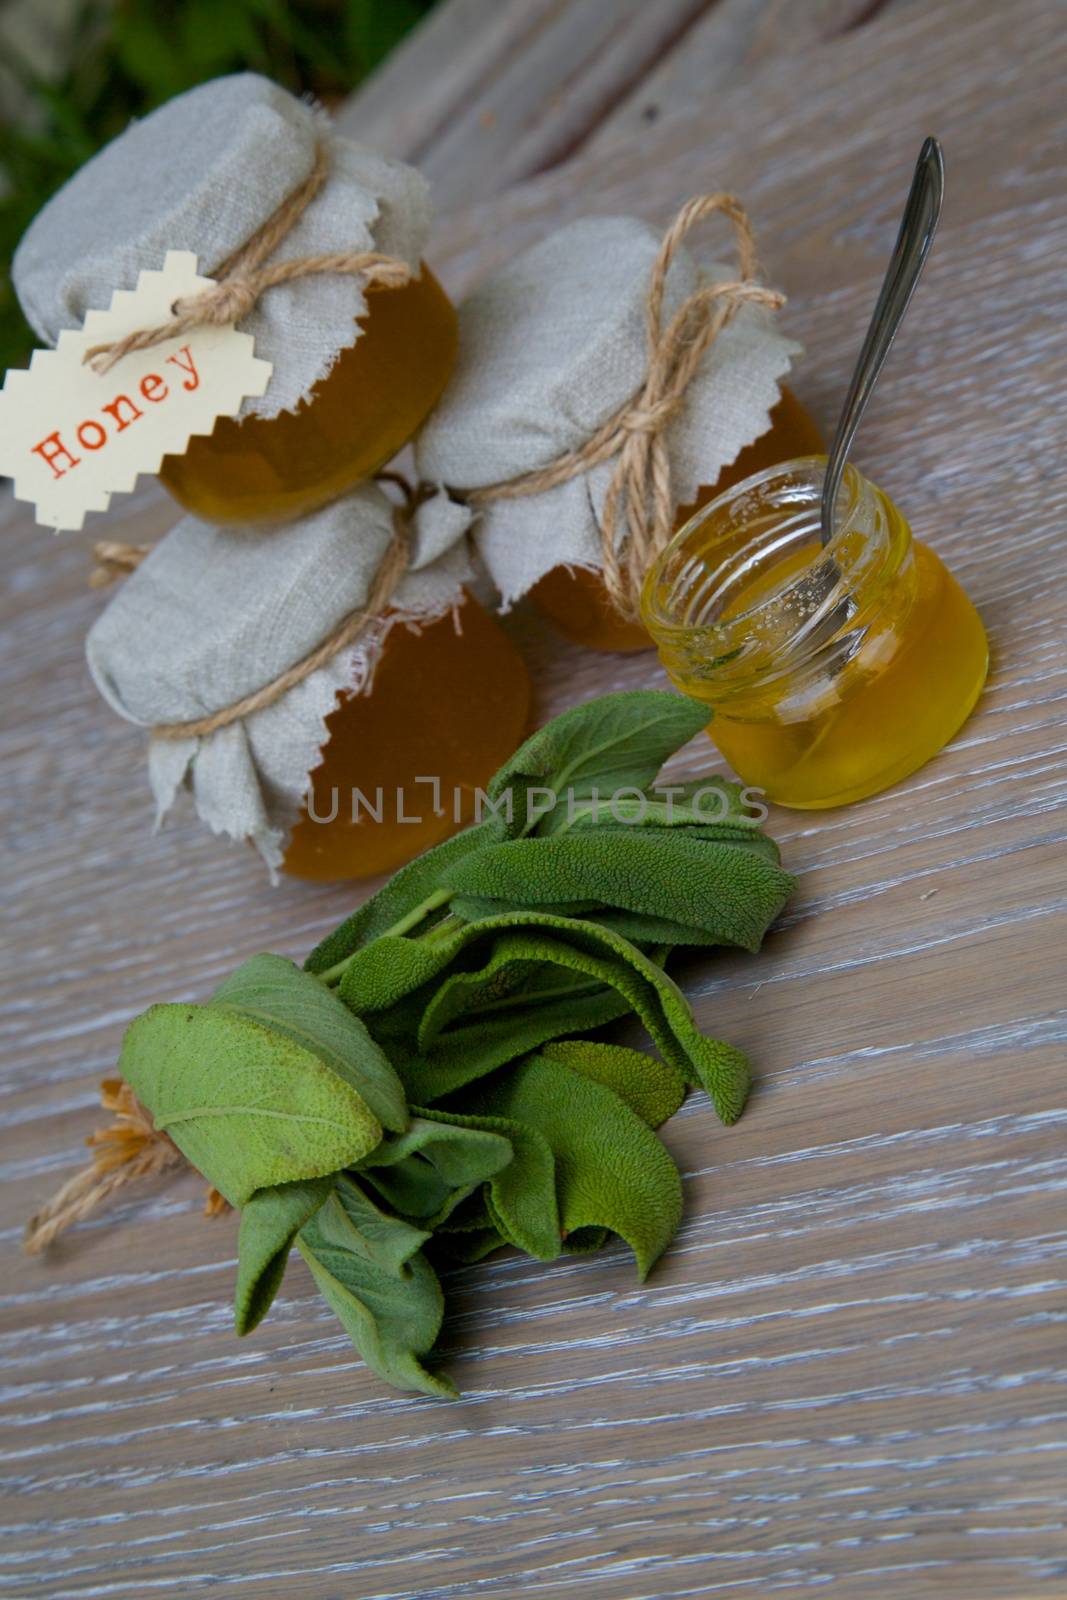 Sage honey and fresh leaves of garden sage on the wooden surface